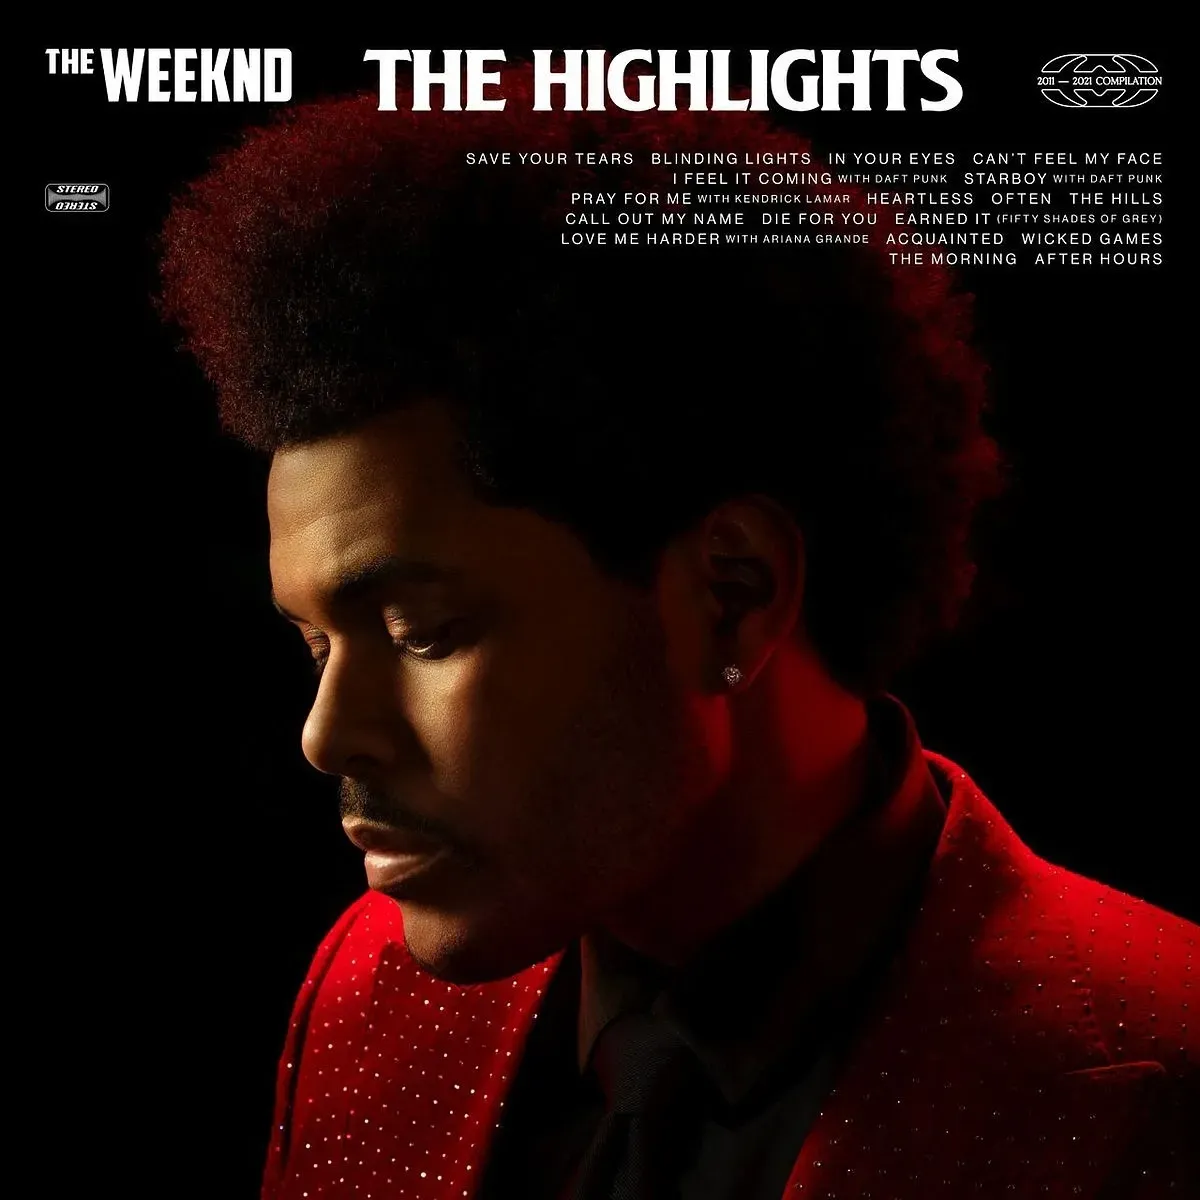 The Highlights - The Weeknd. (LP)